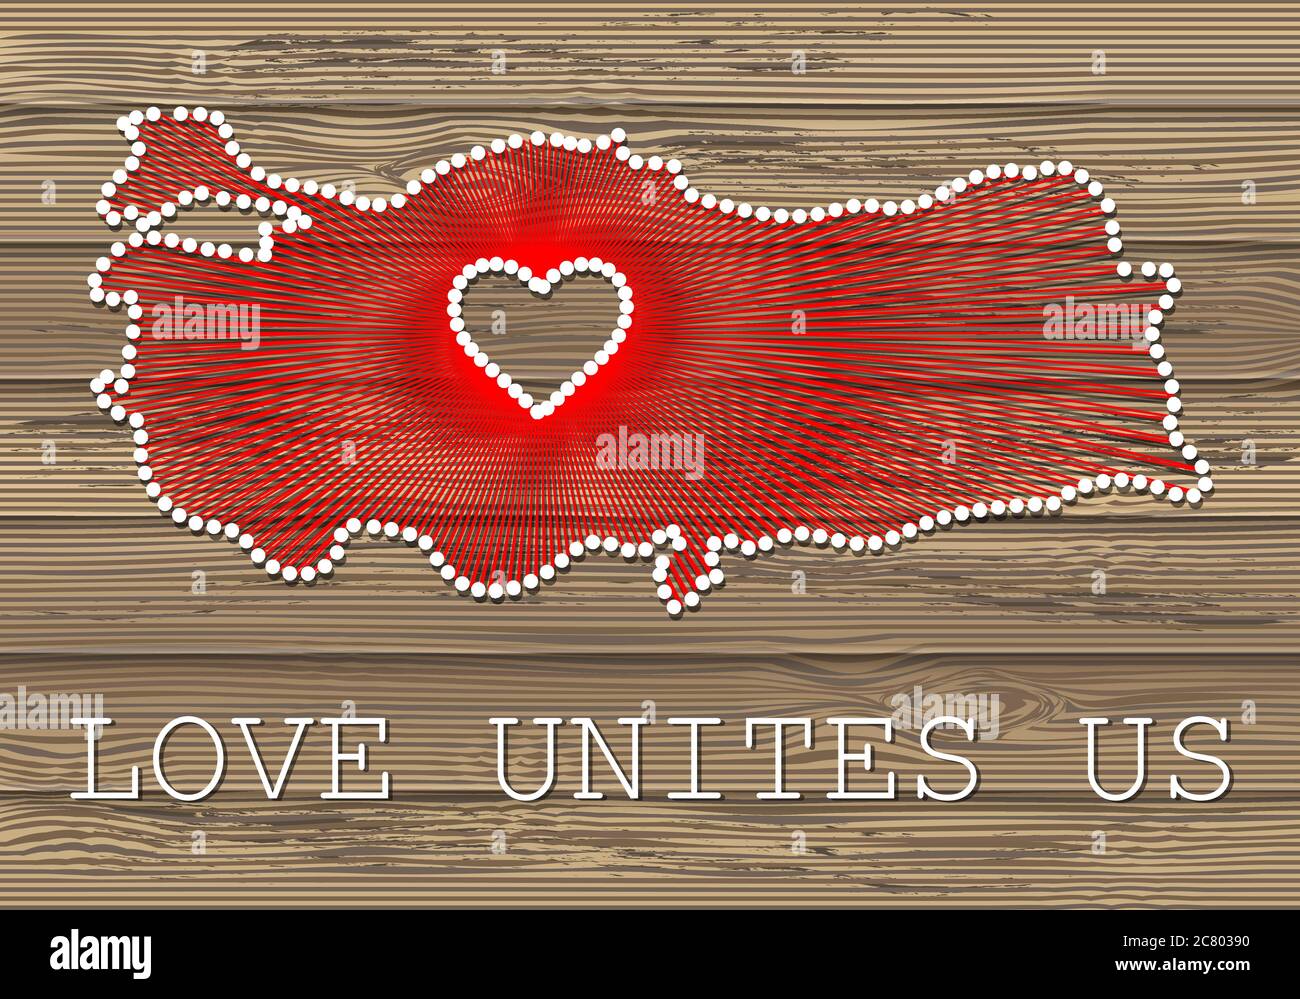 Turkey art vector map with heart. String art, yarn and pins on wooden planks texture. Love unites us. Message of love. Turkey art map Stock Vector